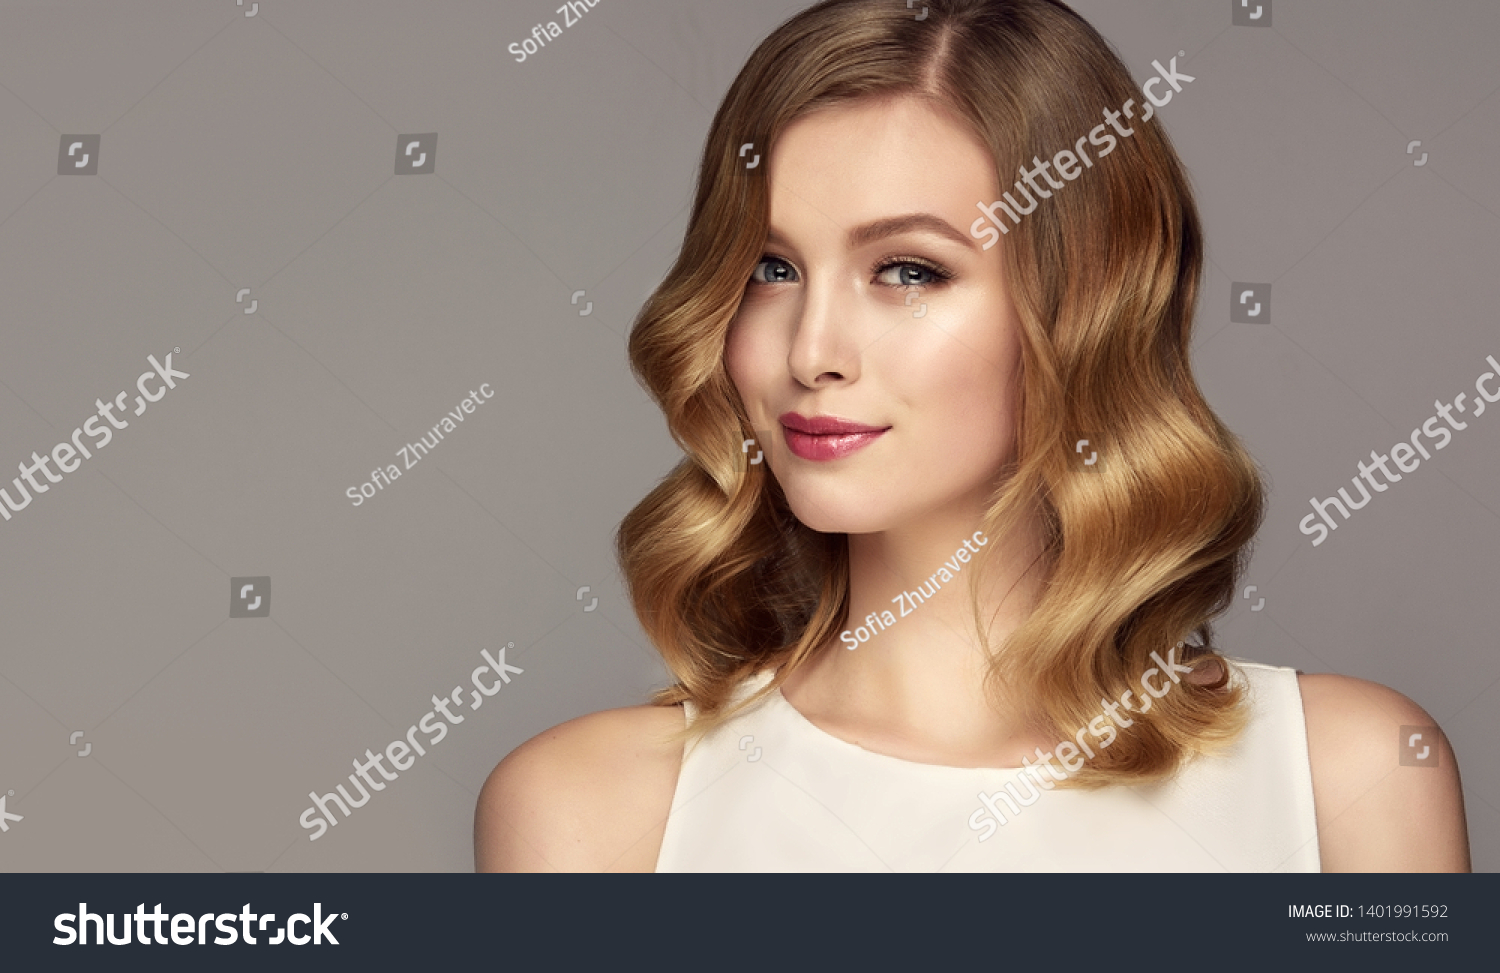 Blonde woman with curly beautiful hair  on gray background. The girl with a pleasant smile. Short haircut . Bob hairstyle
 #1401991592